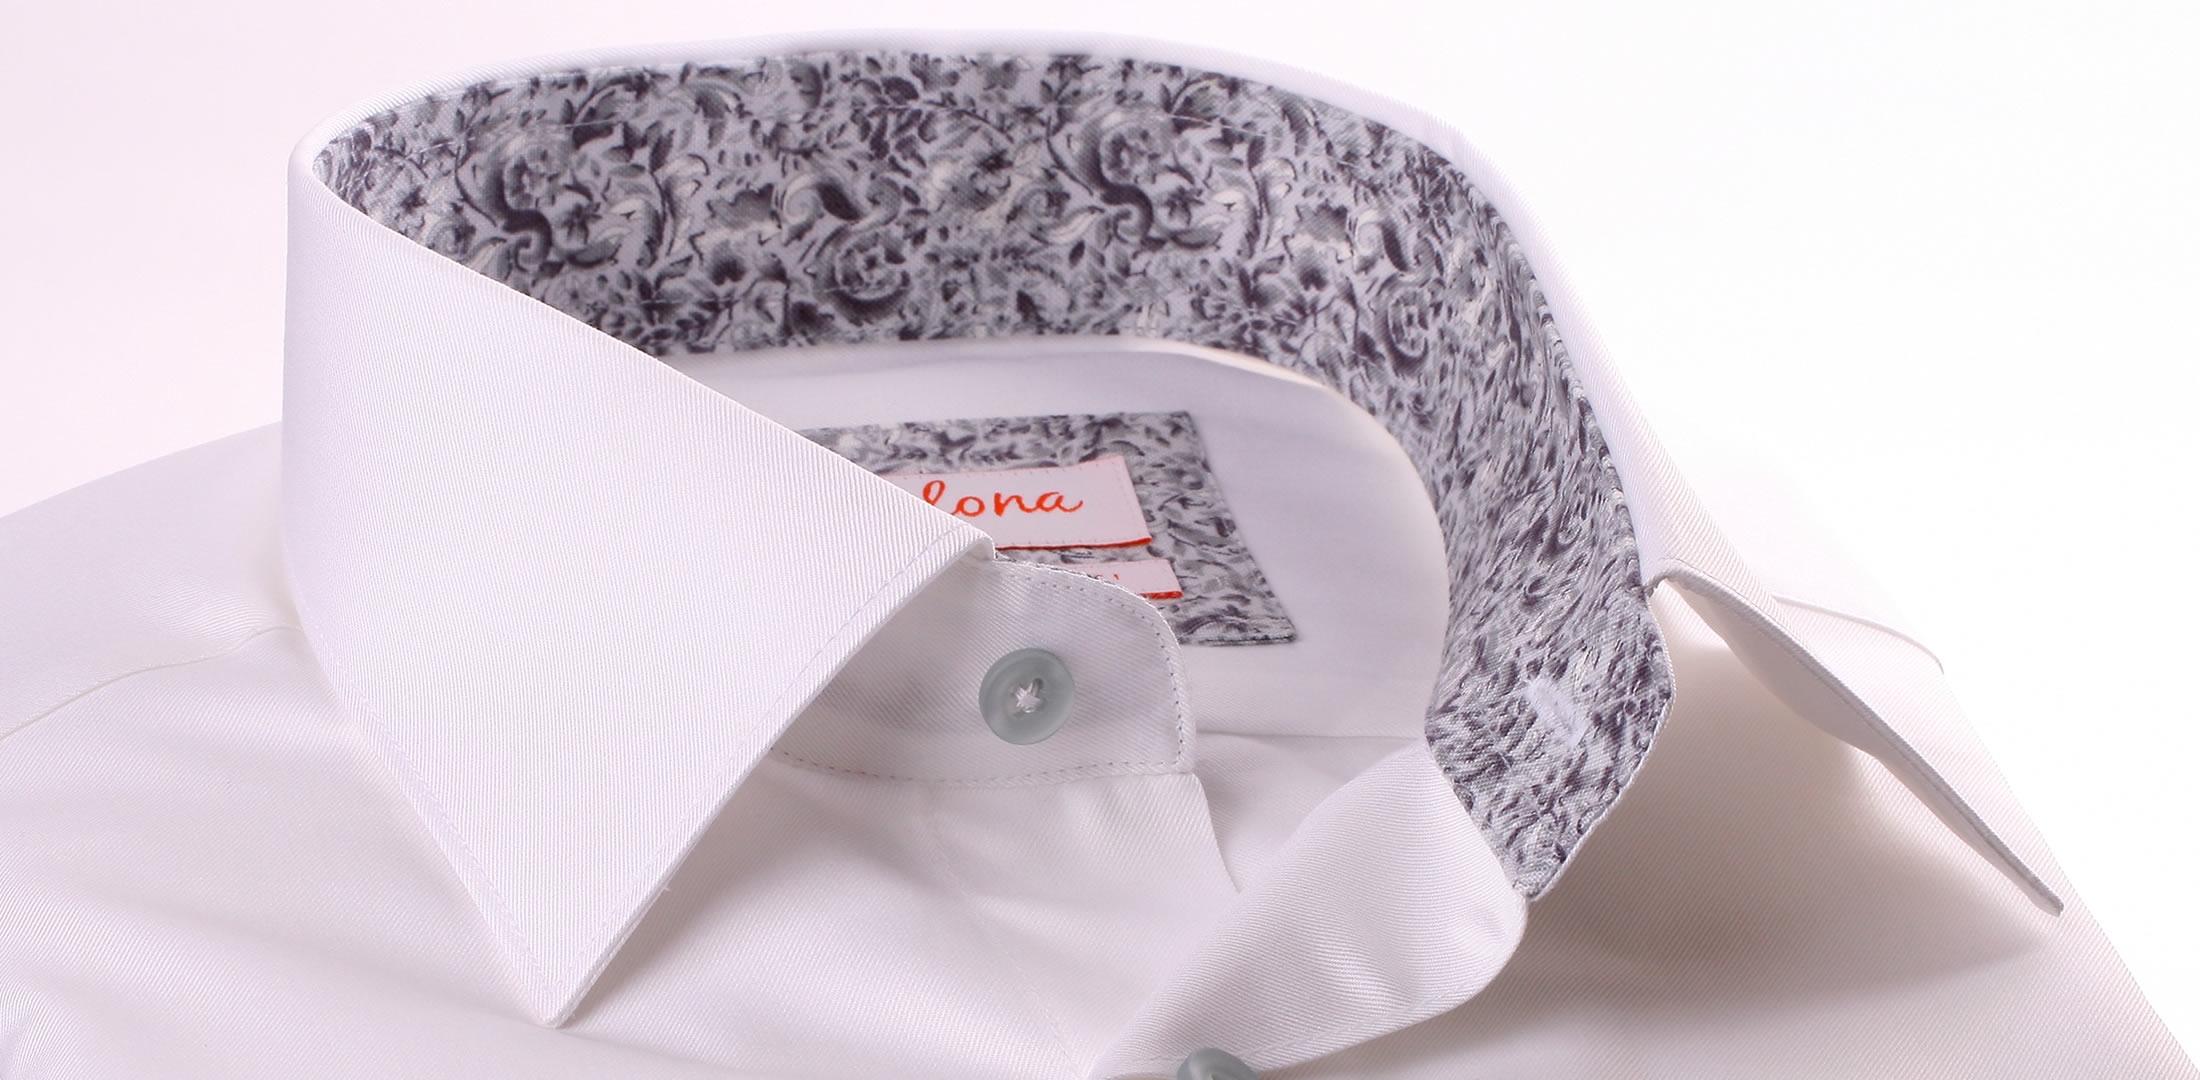 White french cuff shirt with grey pattern collar and cuffs